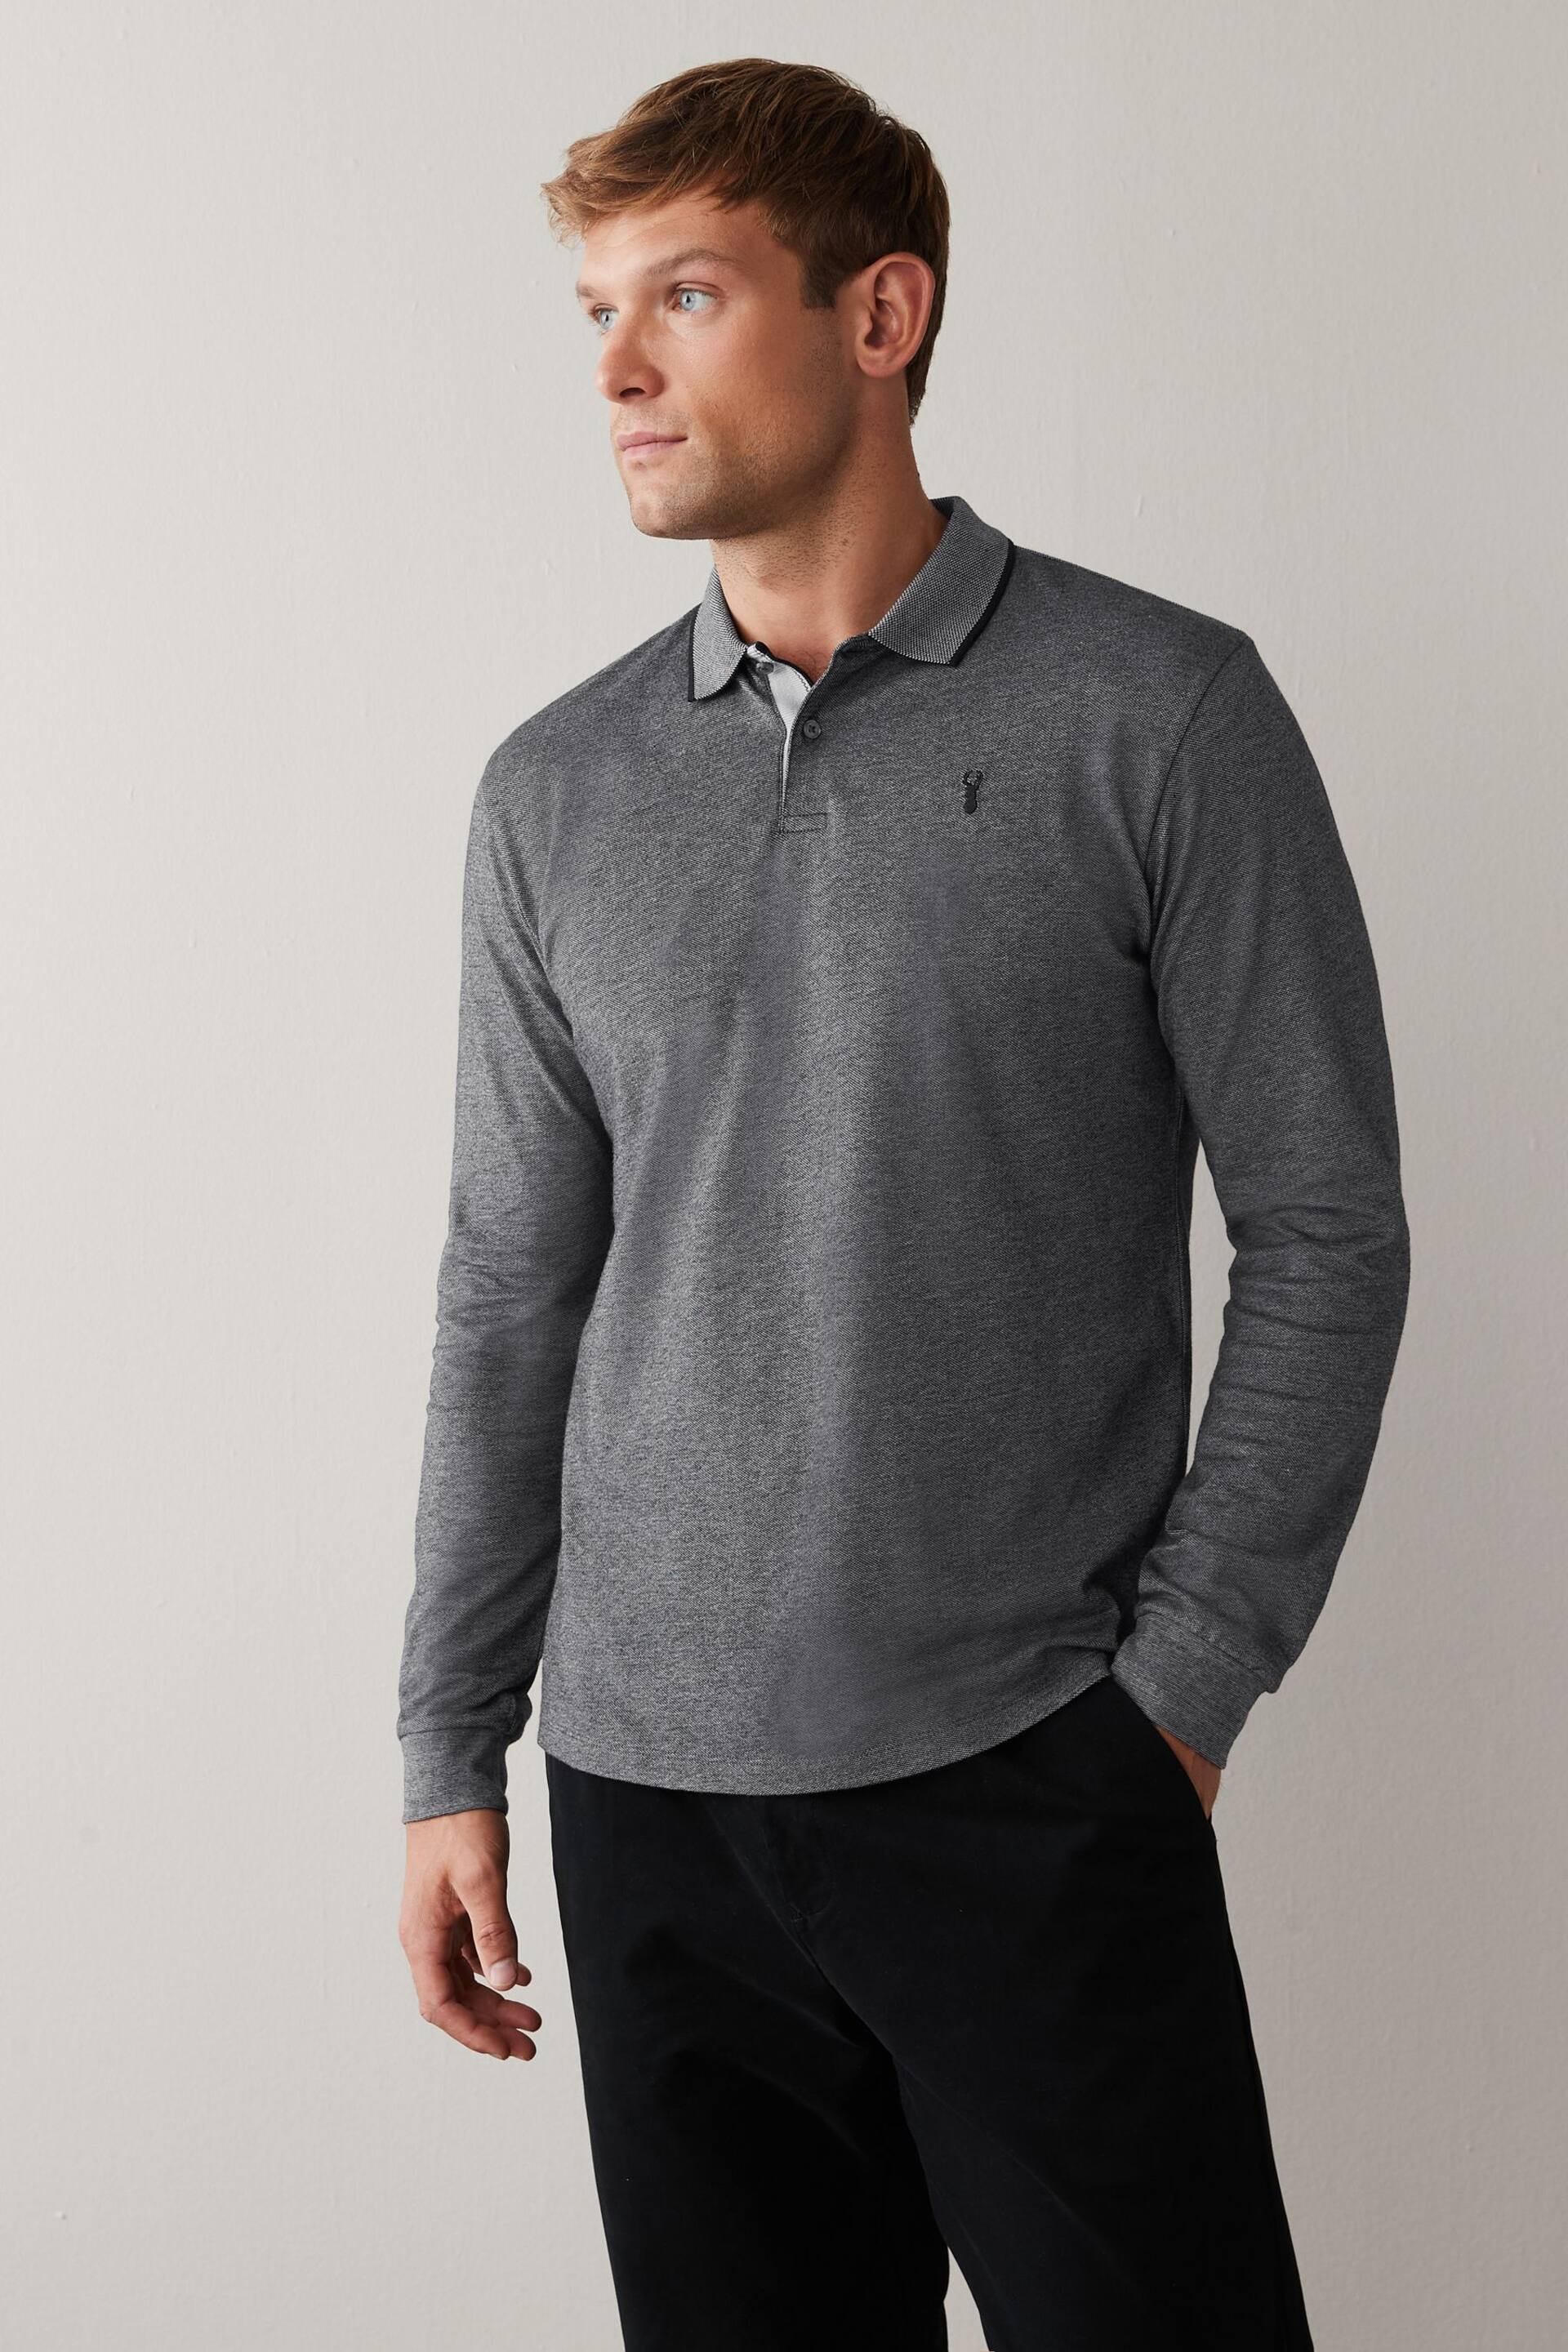 Charcoal Grey Oxford Long Sleeve Pique Polo Shirt - Image 1 of 5